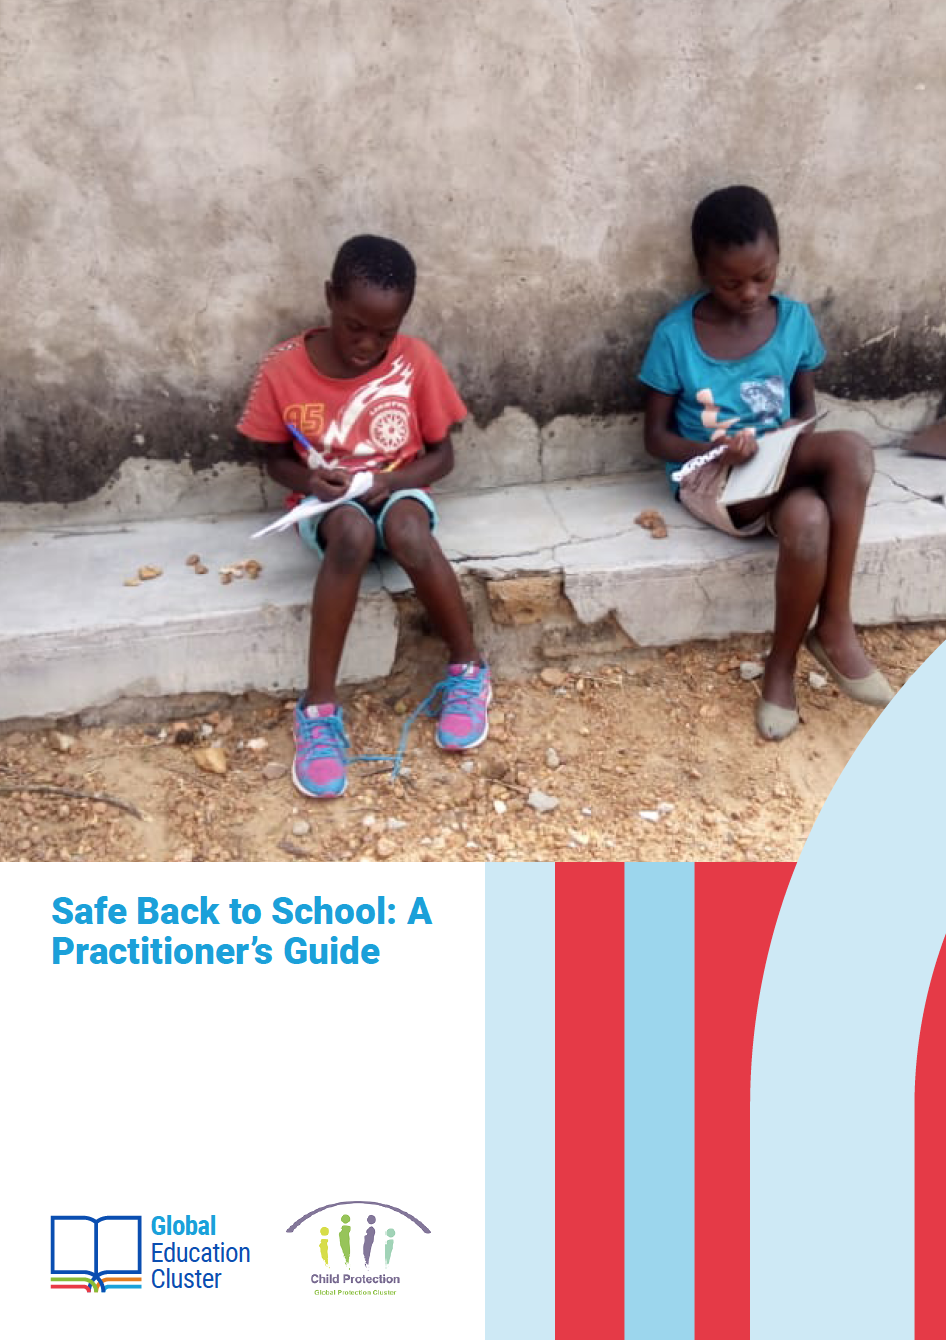 Safe Back to School: A Practitioner’s Guide